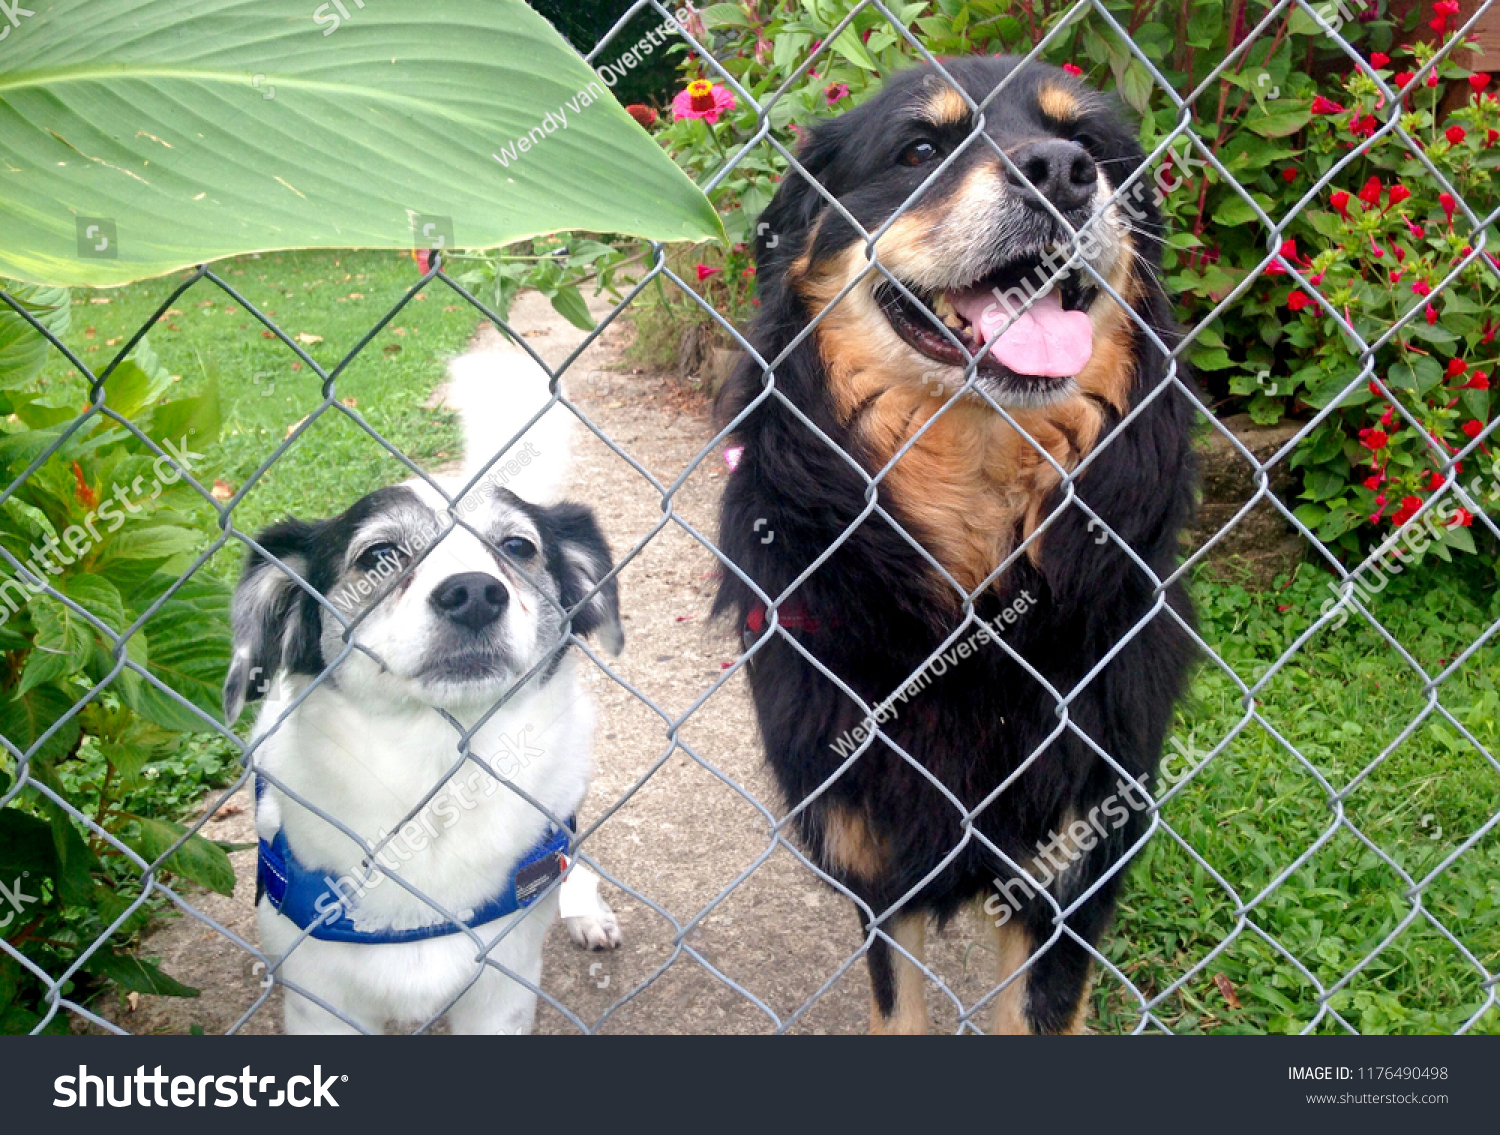 Two very cute smiling dogs look through a chain link fence #1176490498